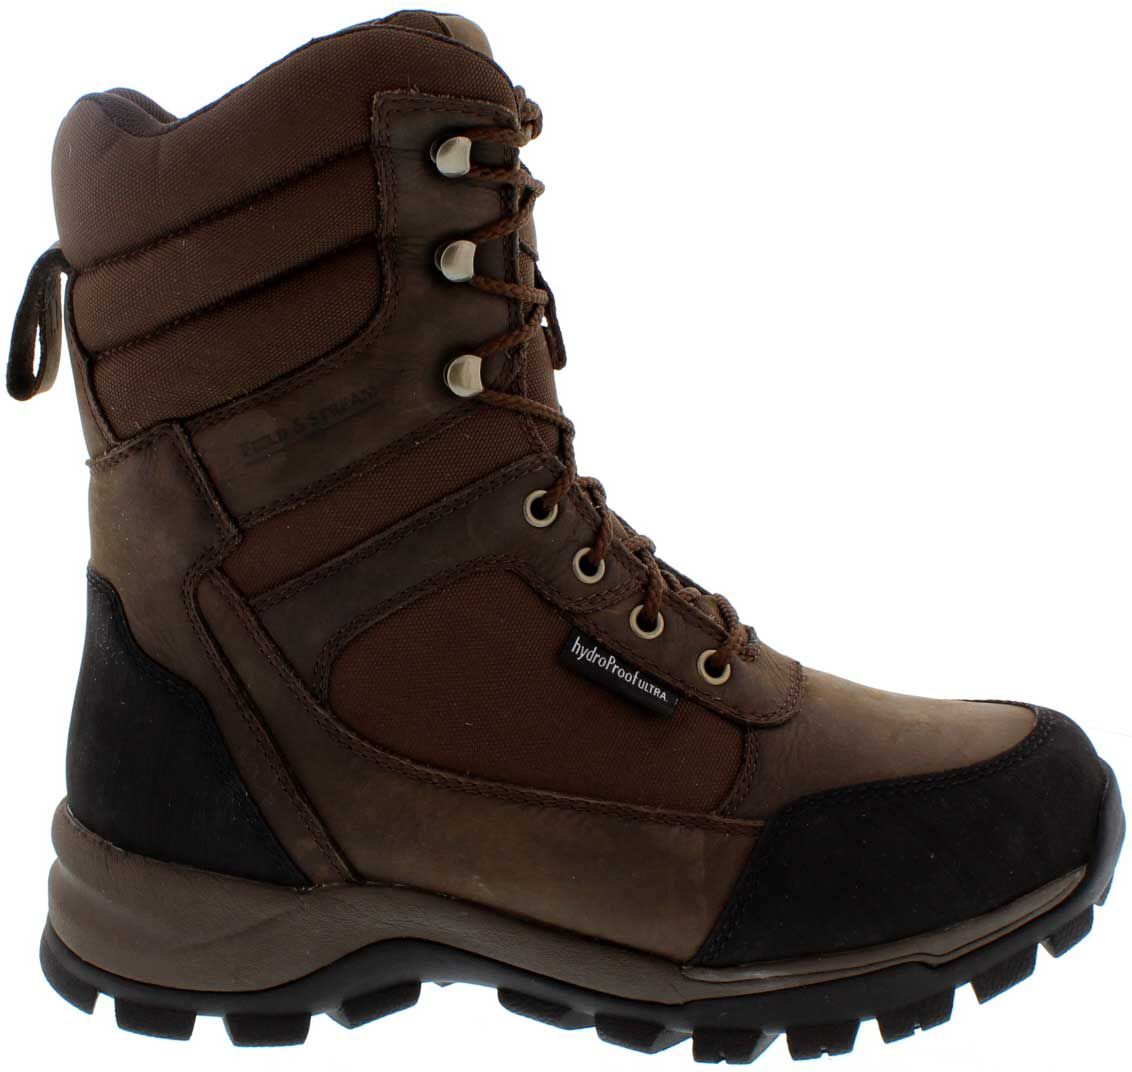 1000g thinsulate work boots